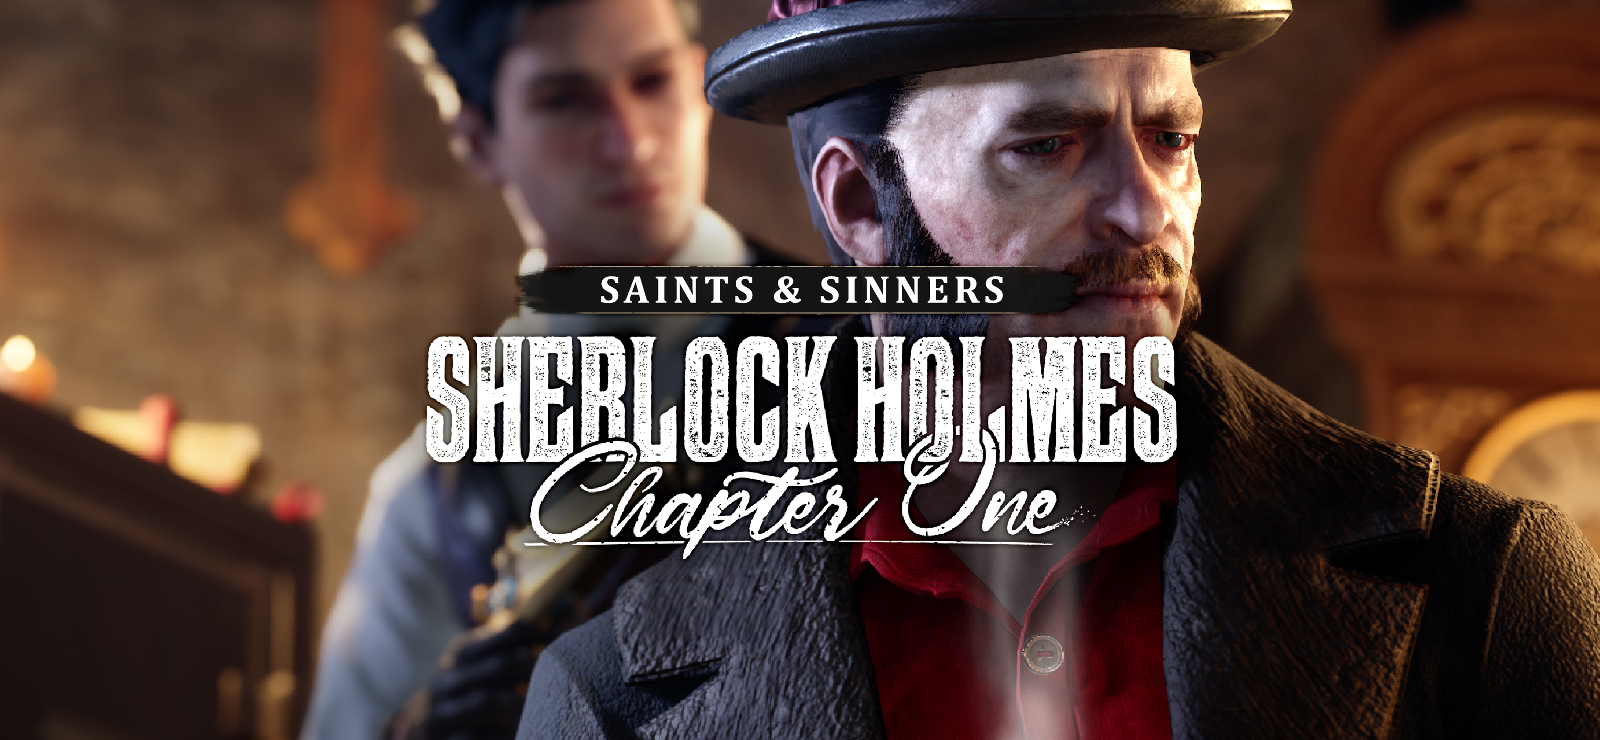 Sherlock Holmes Chapter One - Saints And Sinners